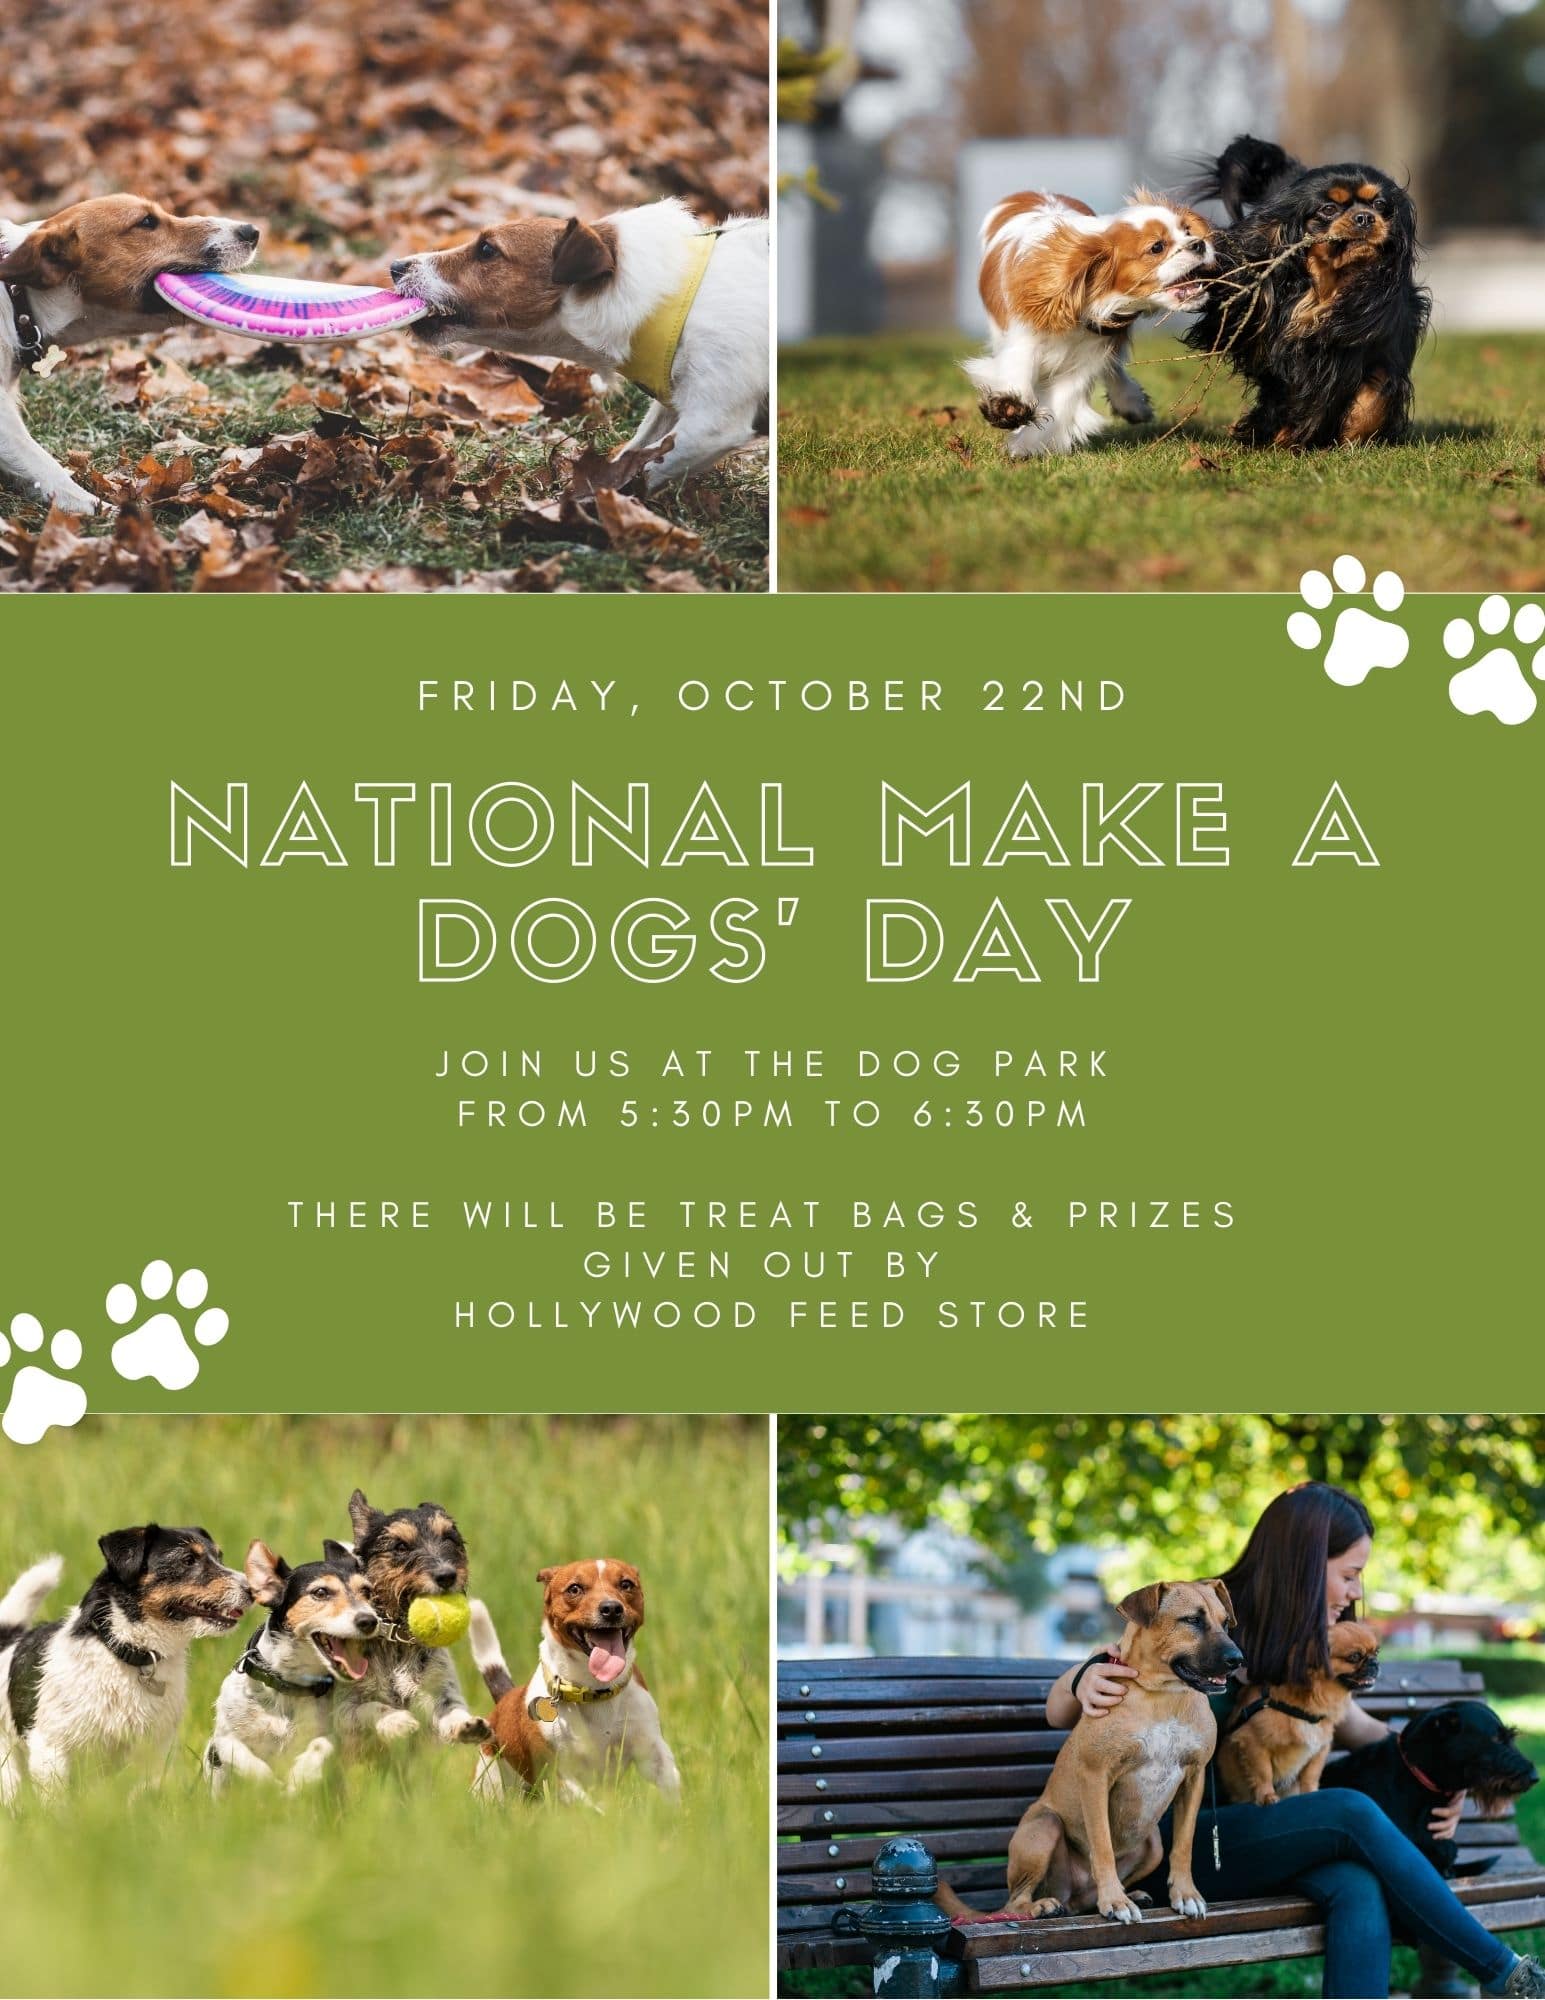 National make a dog's day flyer promoting Apartments in The Woodlands TX.